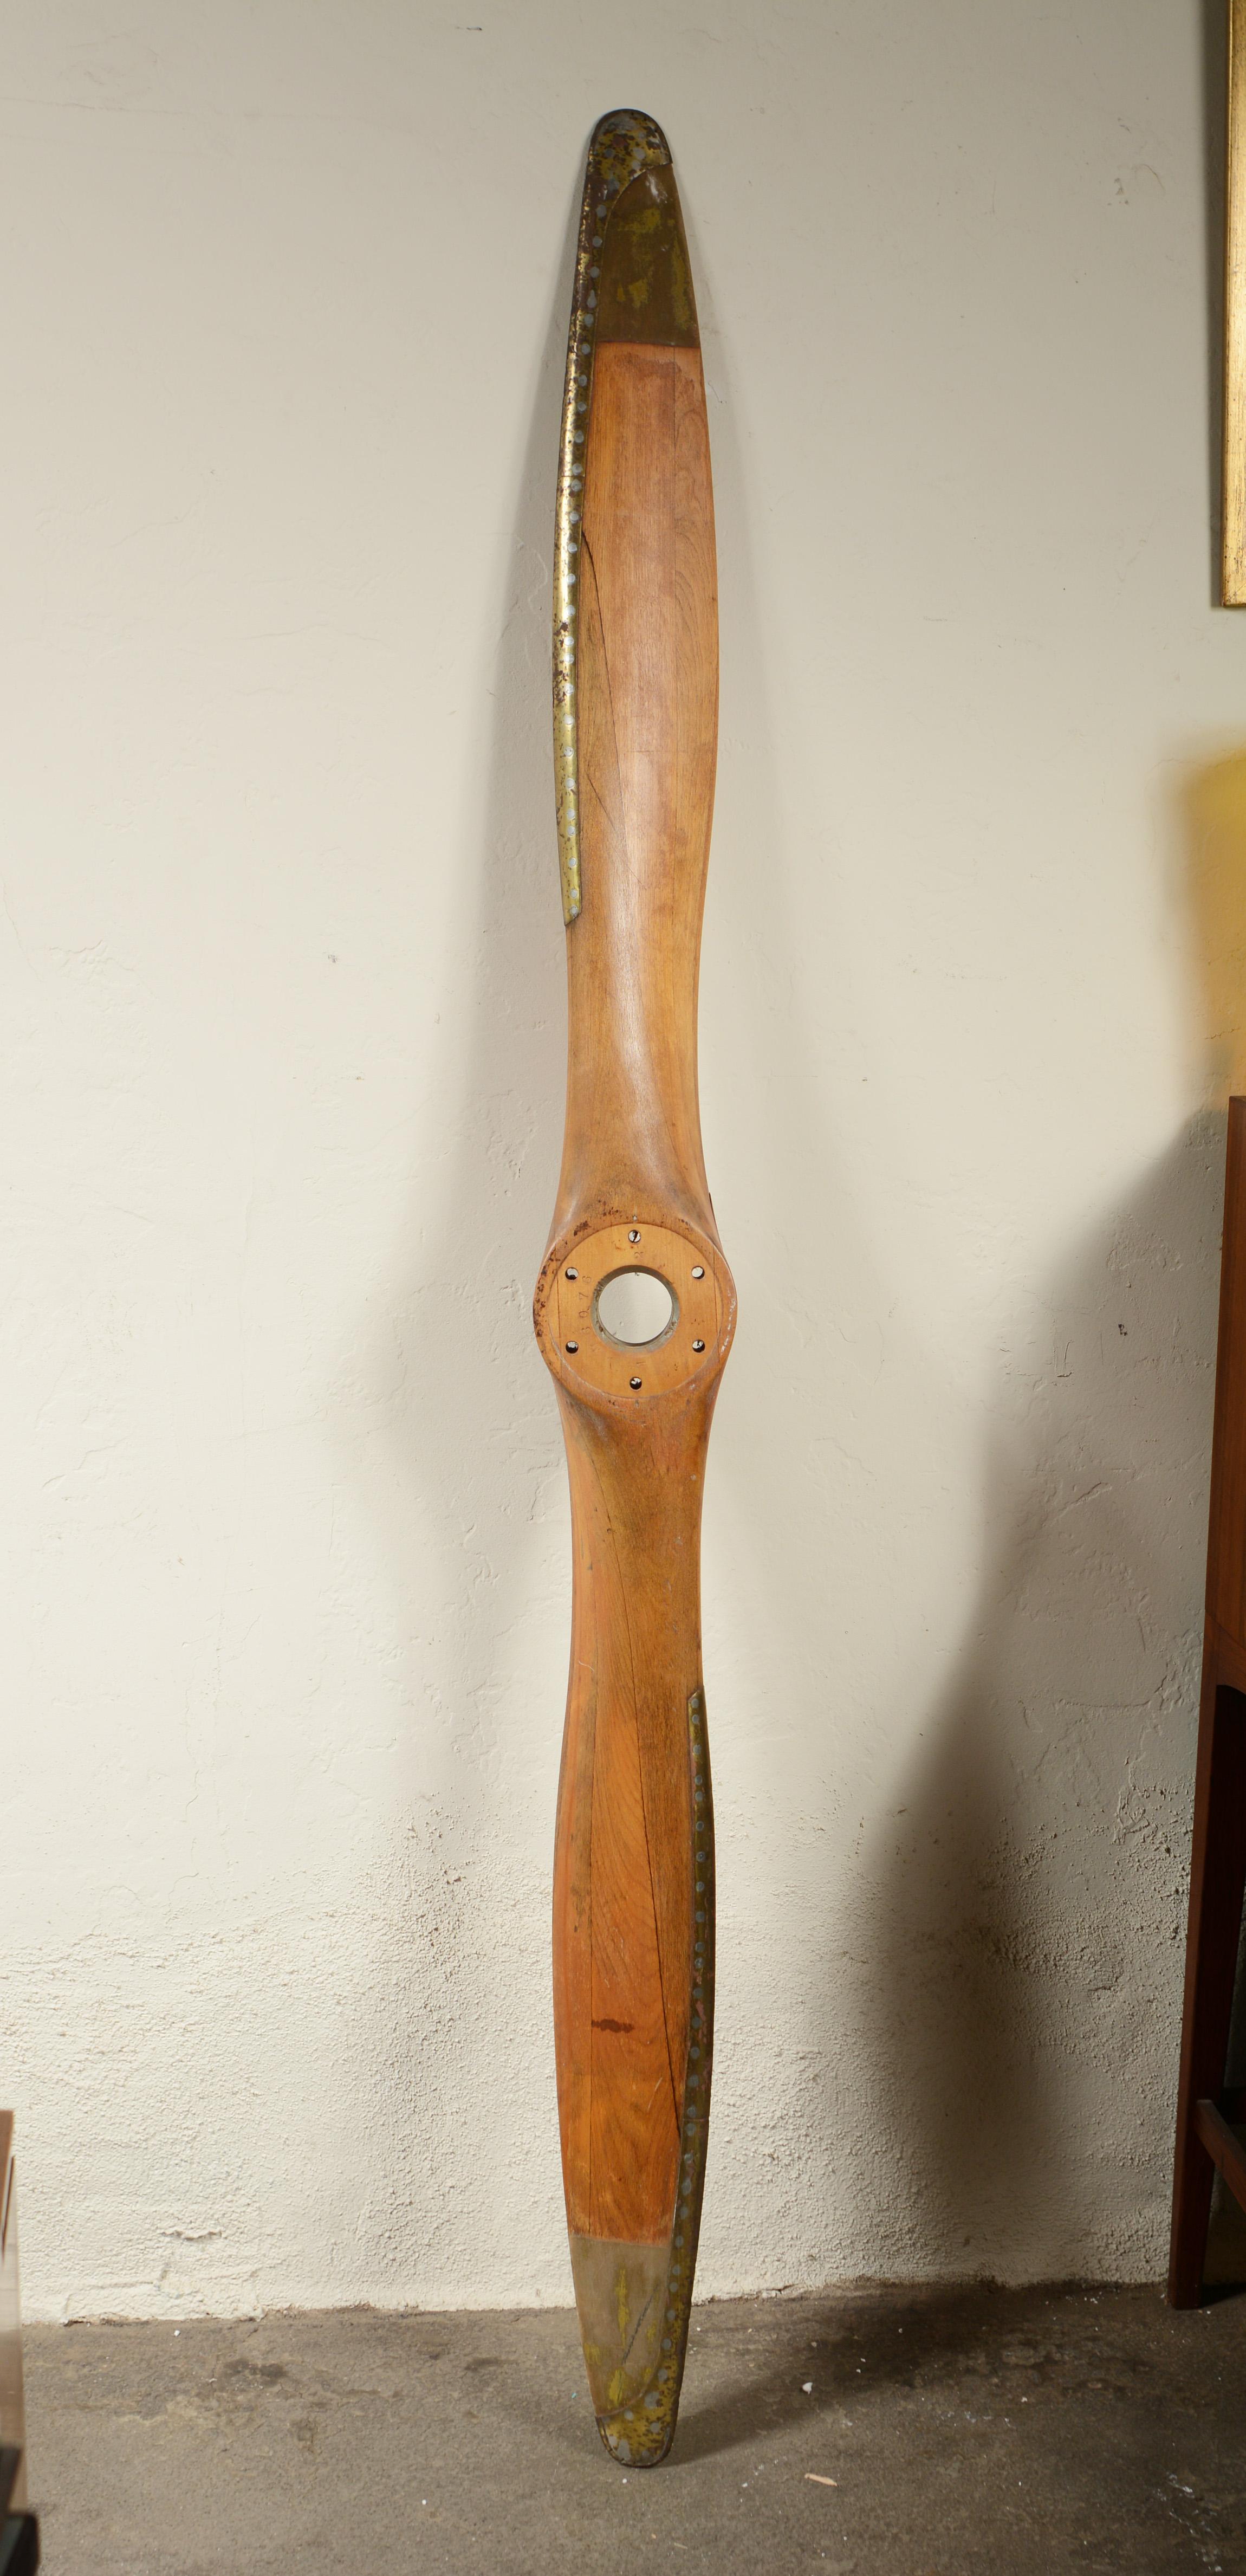 Wood airplane propeller made by Sensenich. The serial number dates this propeller to 1947. This would have been used on Aaronca, Piper and Taylorcraft planes. The wood is discolored in a few areas. There is a crack in the wood on the hub.